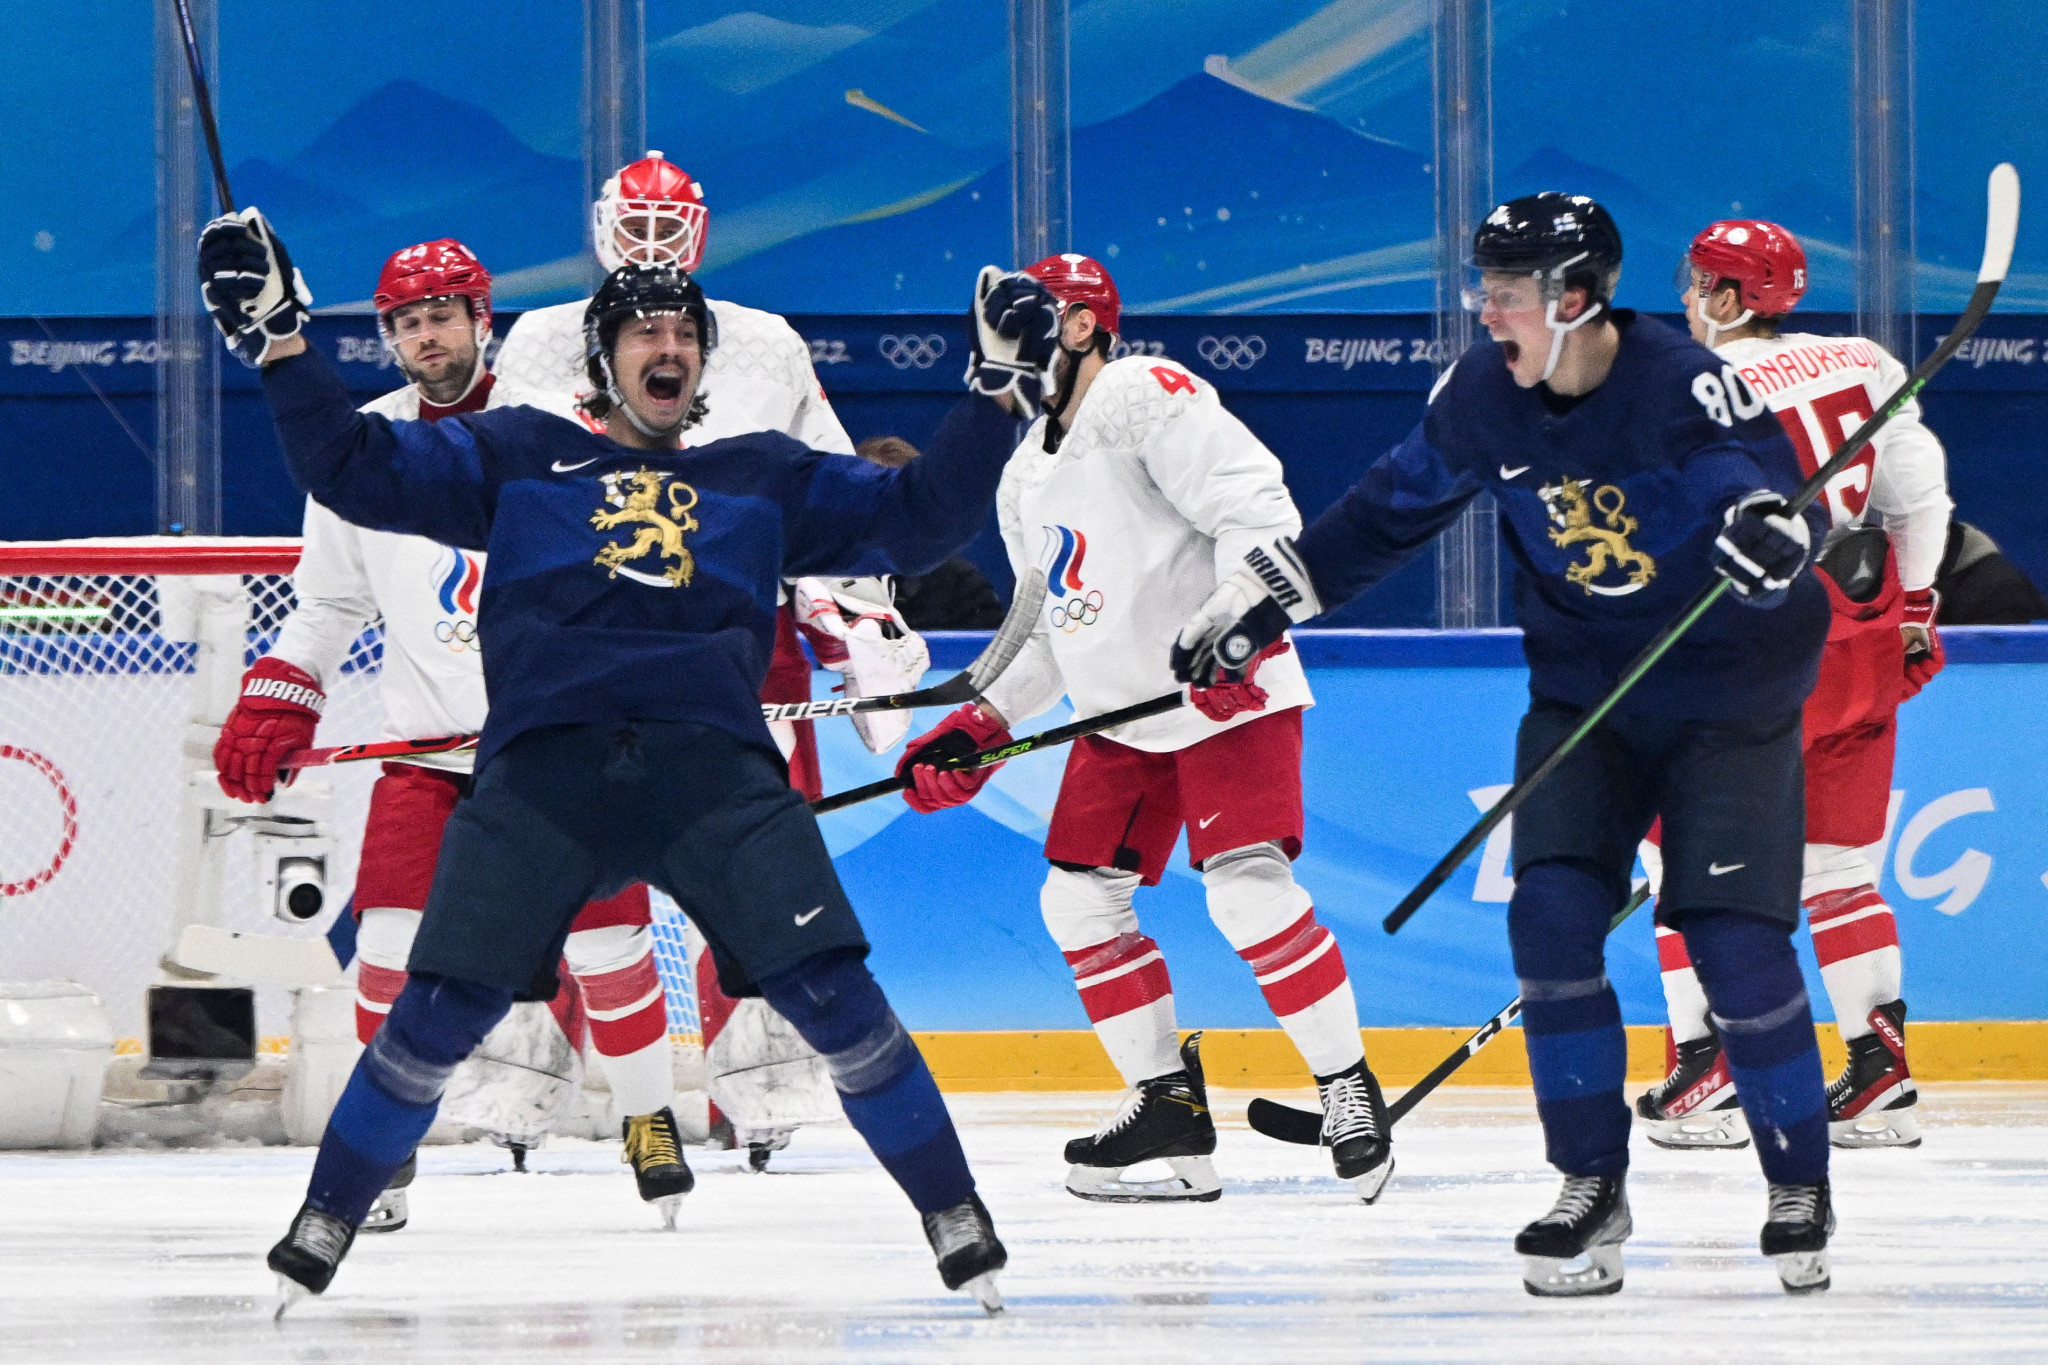 Hannes Björninen, left, scored the winner in the third period as Finland beat the Russian Olympic Committee 2-1 to earn their first-ever Olympic ice hockey gold medal ©Getty Images